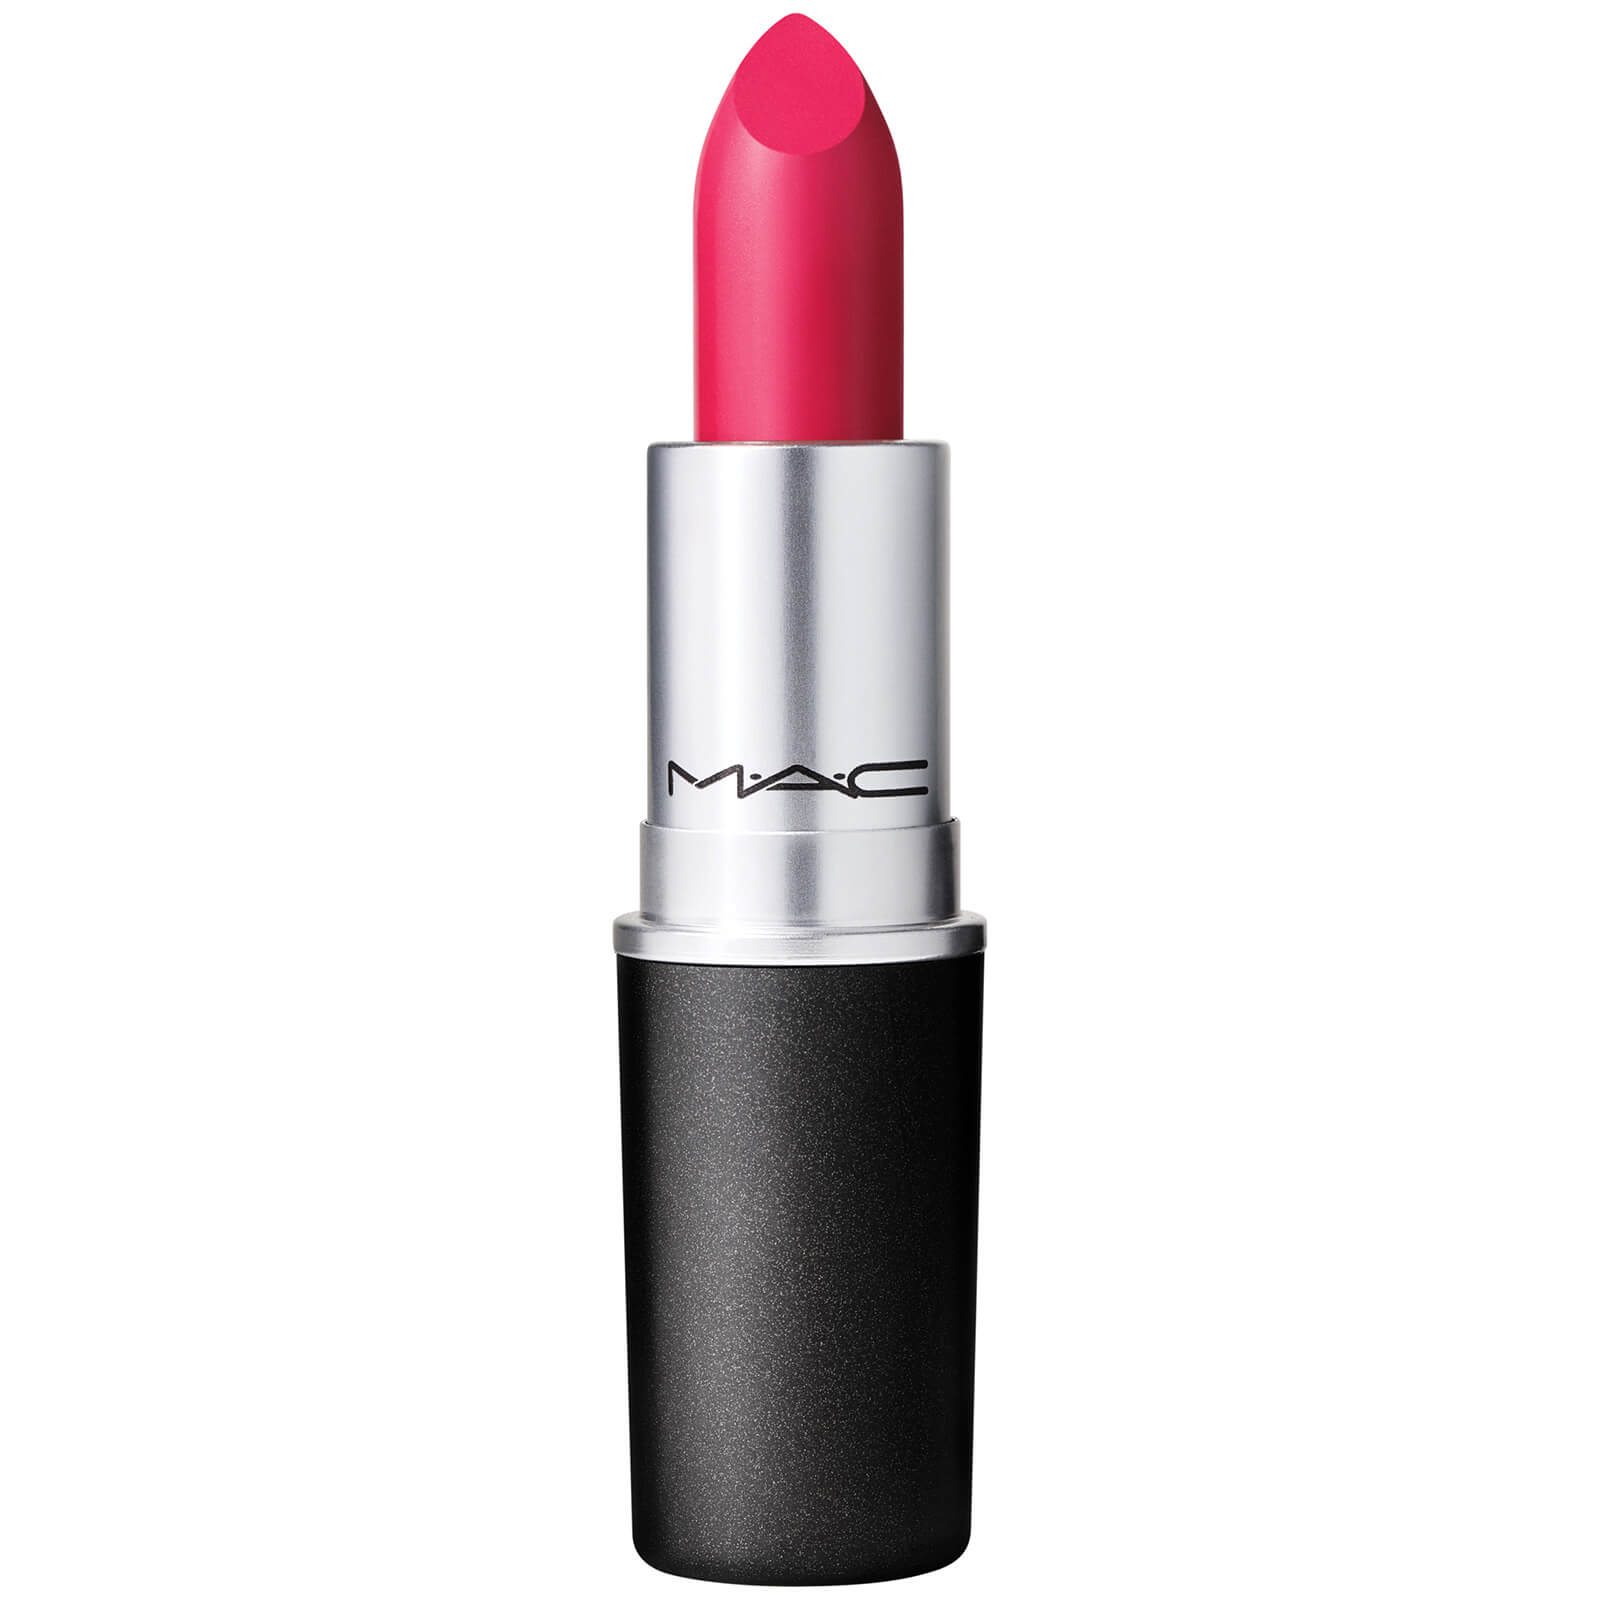 MAC Amplified Crème Lipstick Re-Think Pink (Various Shades) - Dallas